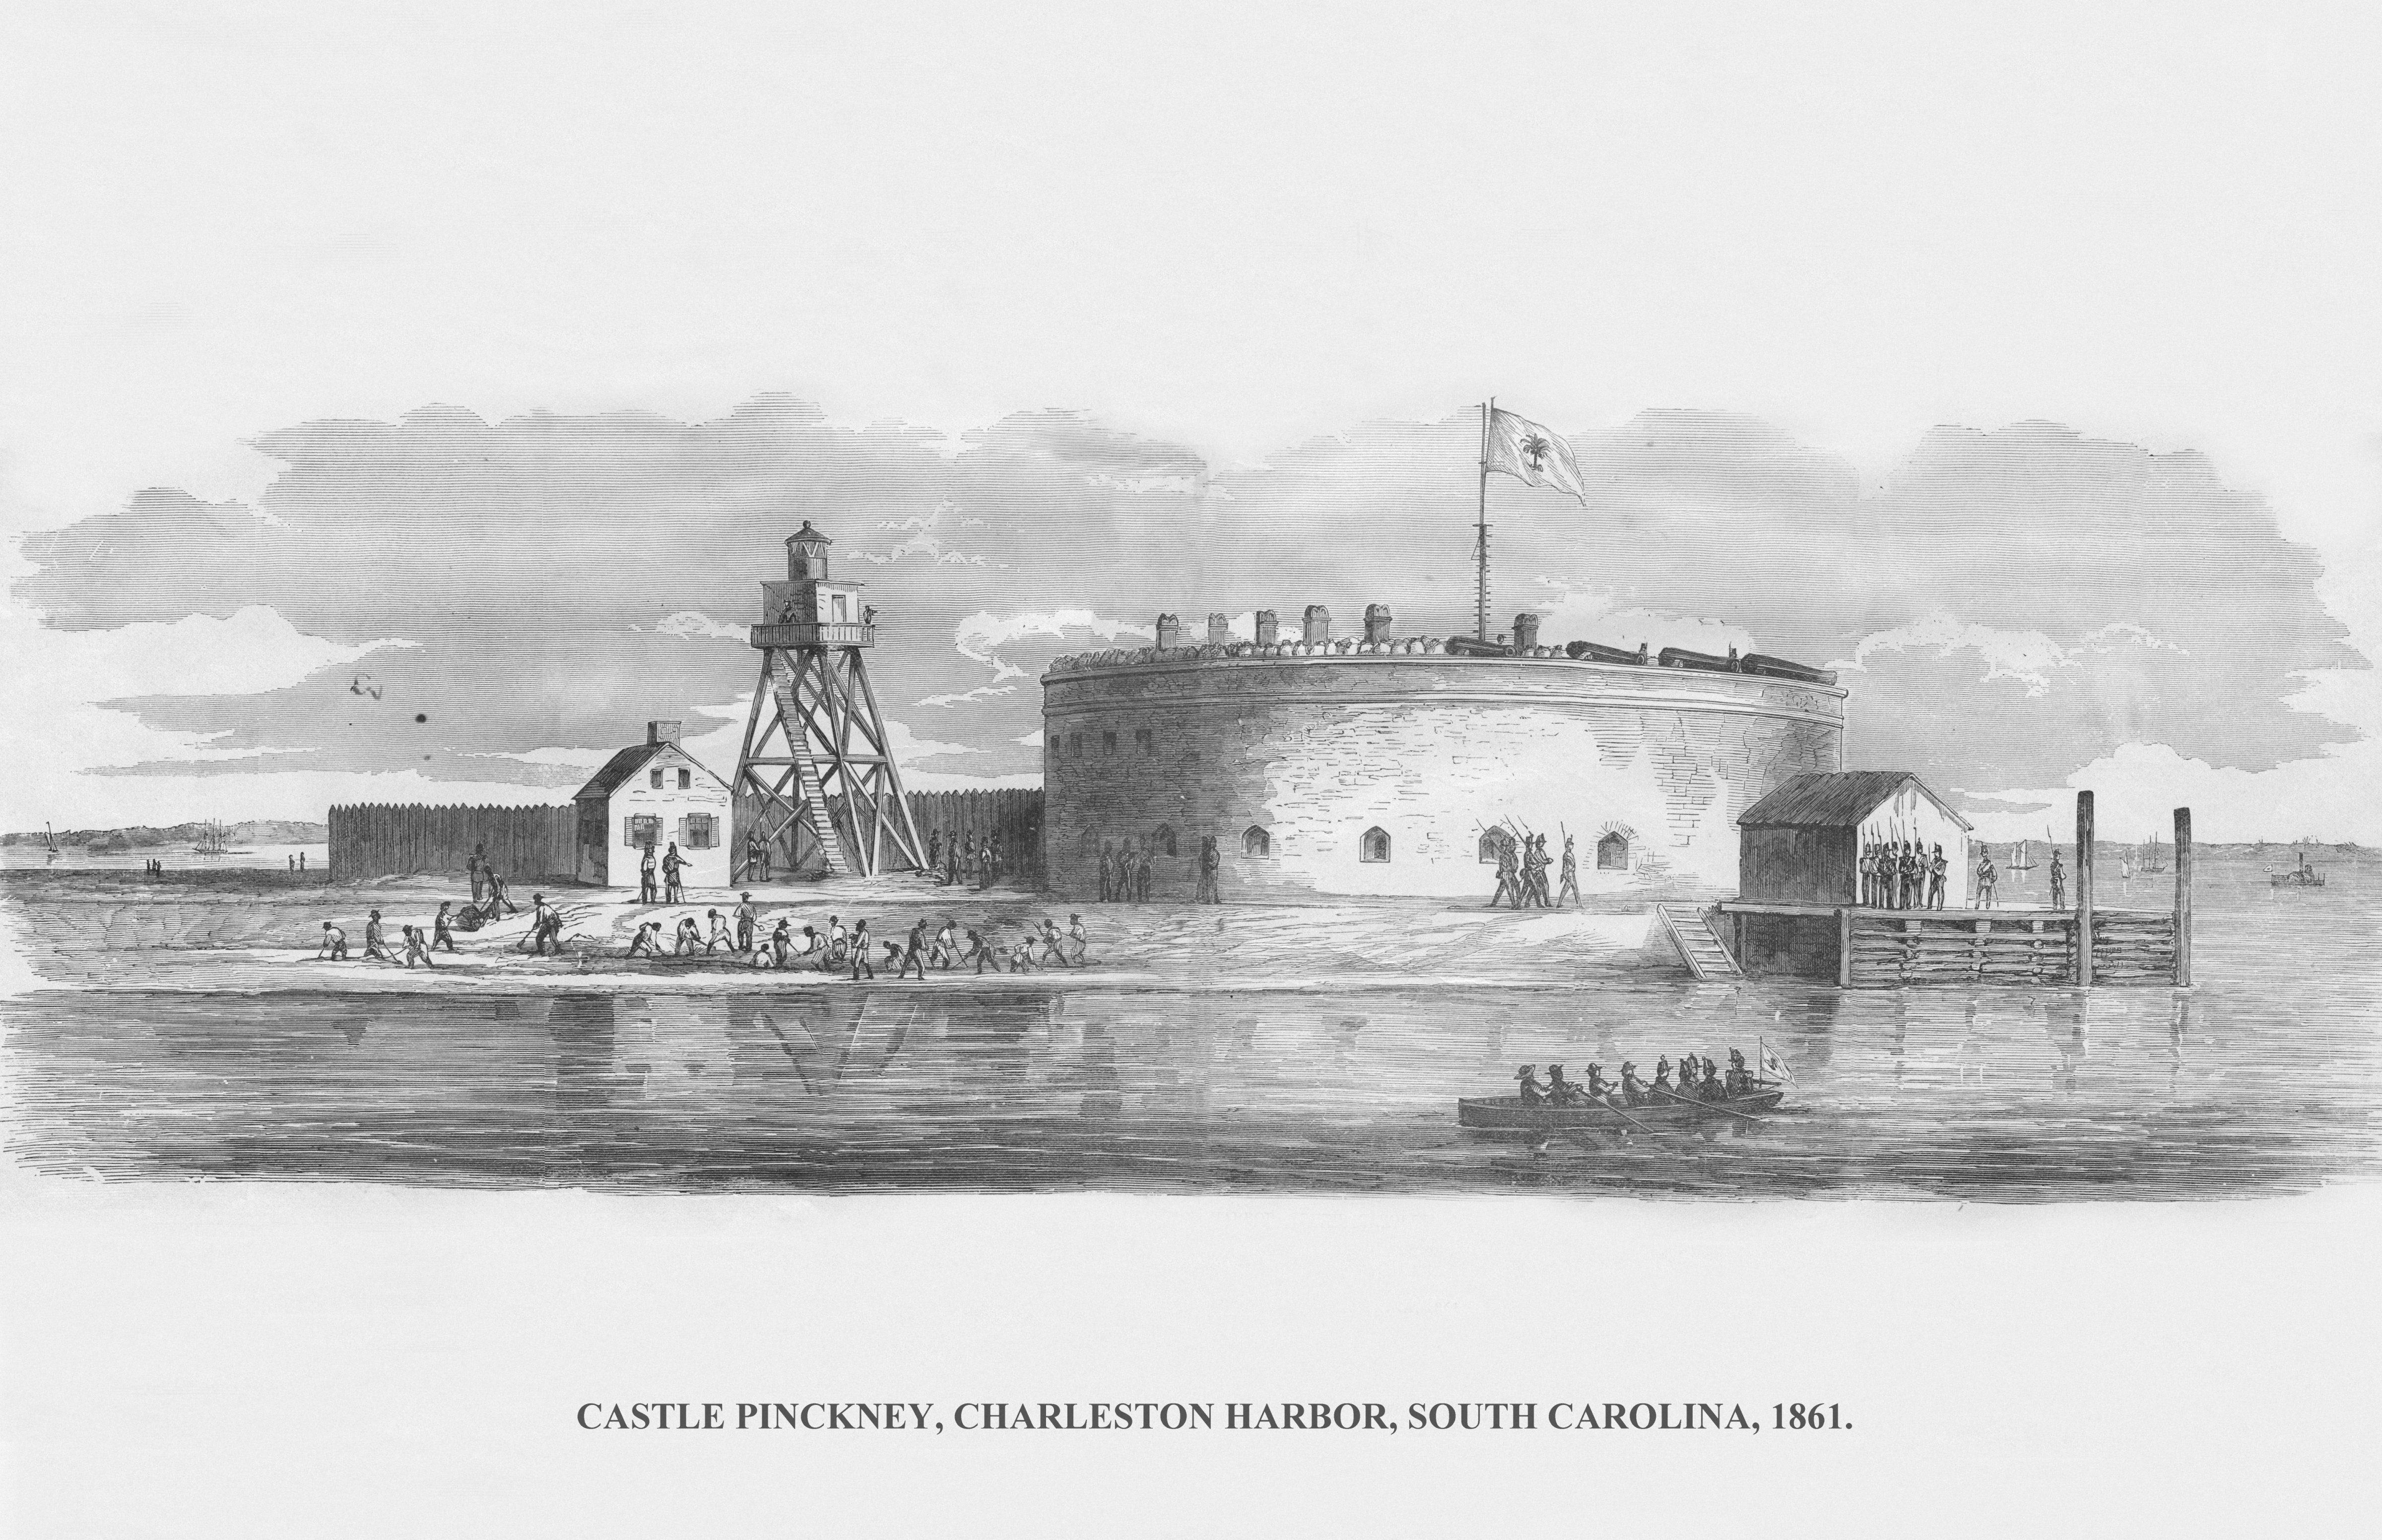 Castle Pinckney in South Carolina's Charleston Harbor in 1861, from an issue of Frank Leslie's Illustrated Almanac. (Buyenlarge—Getty Images)